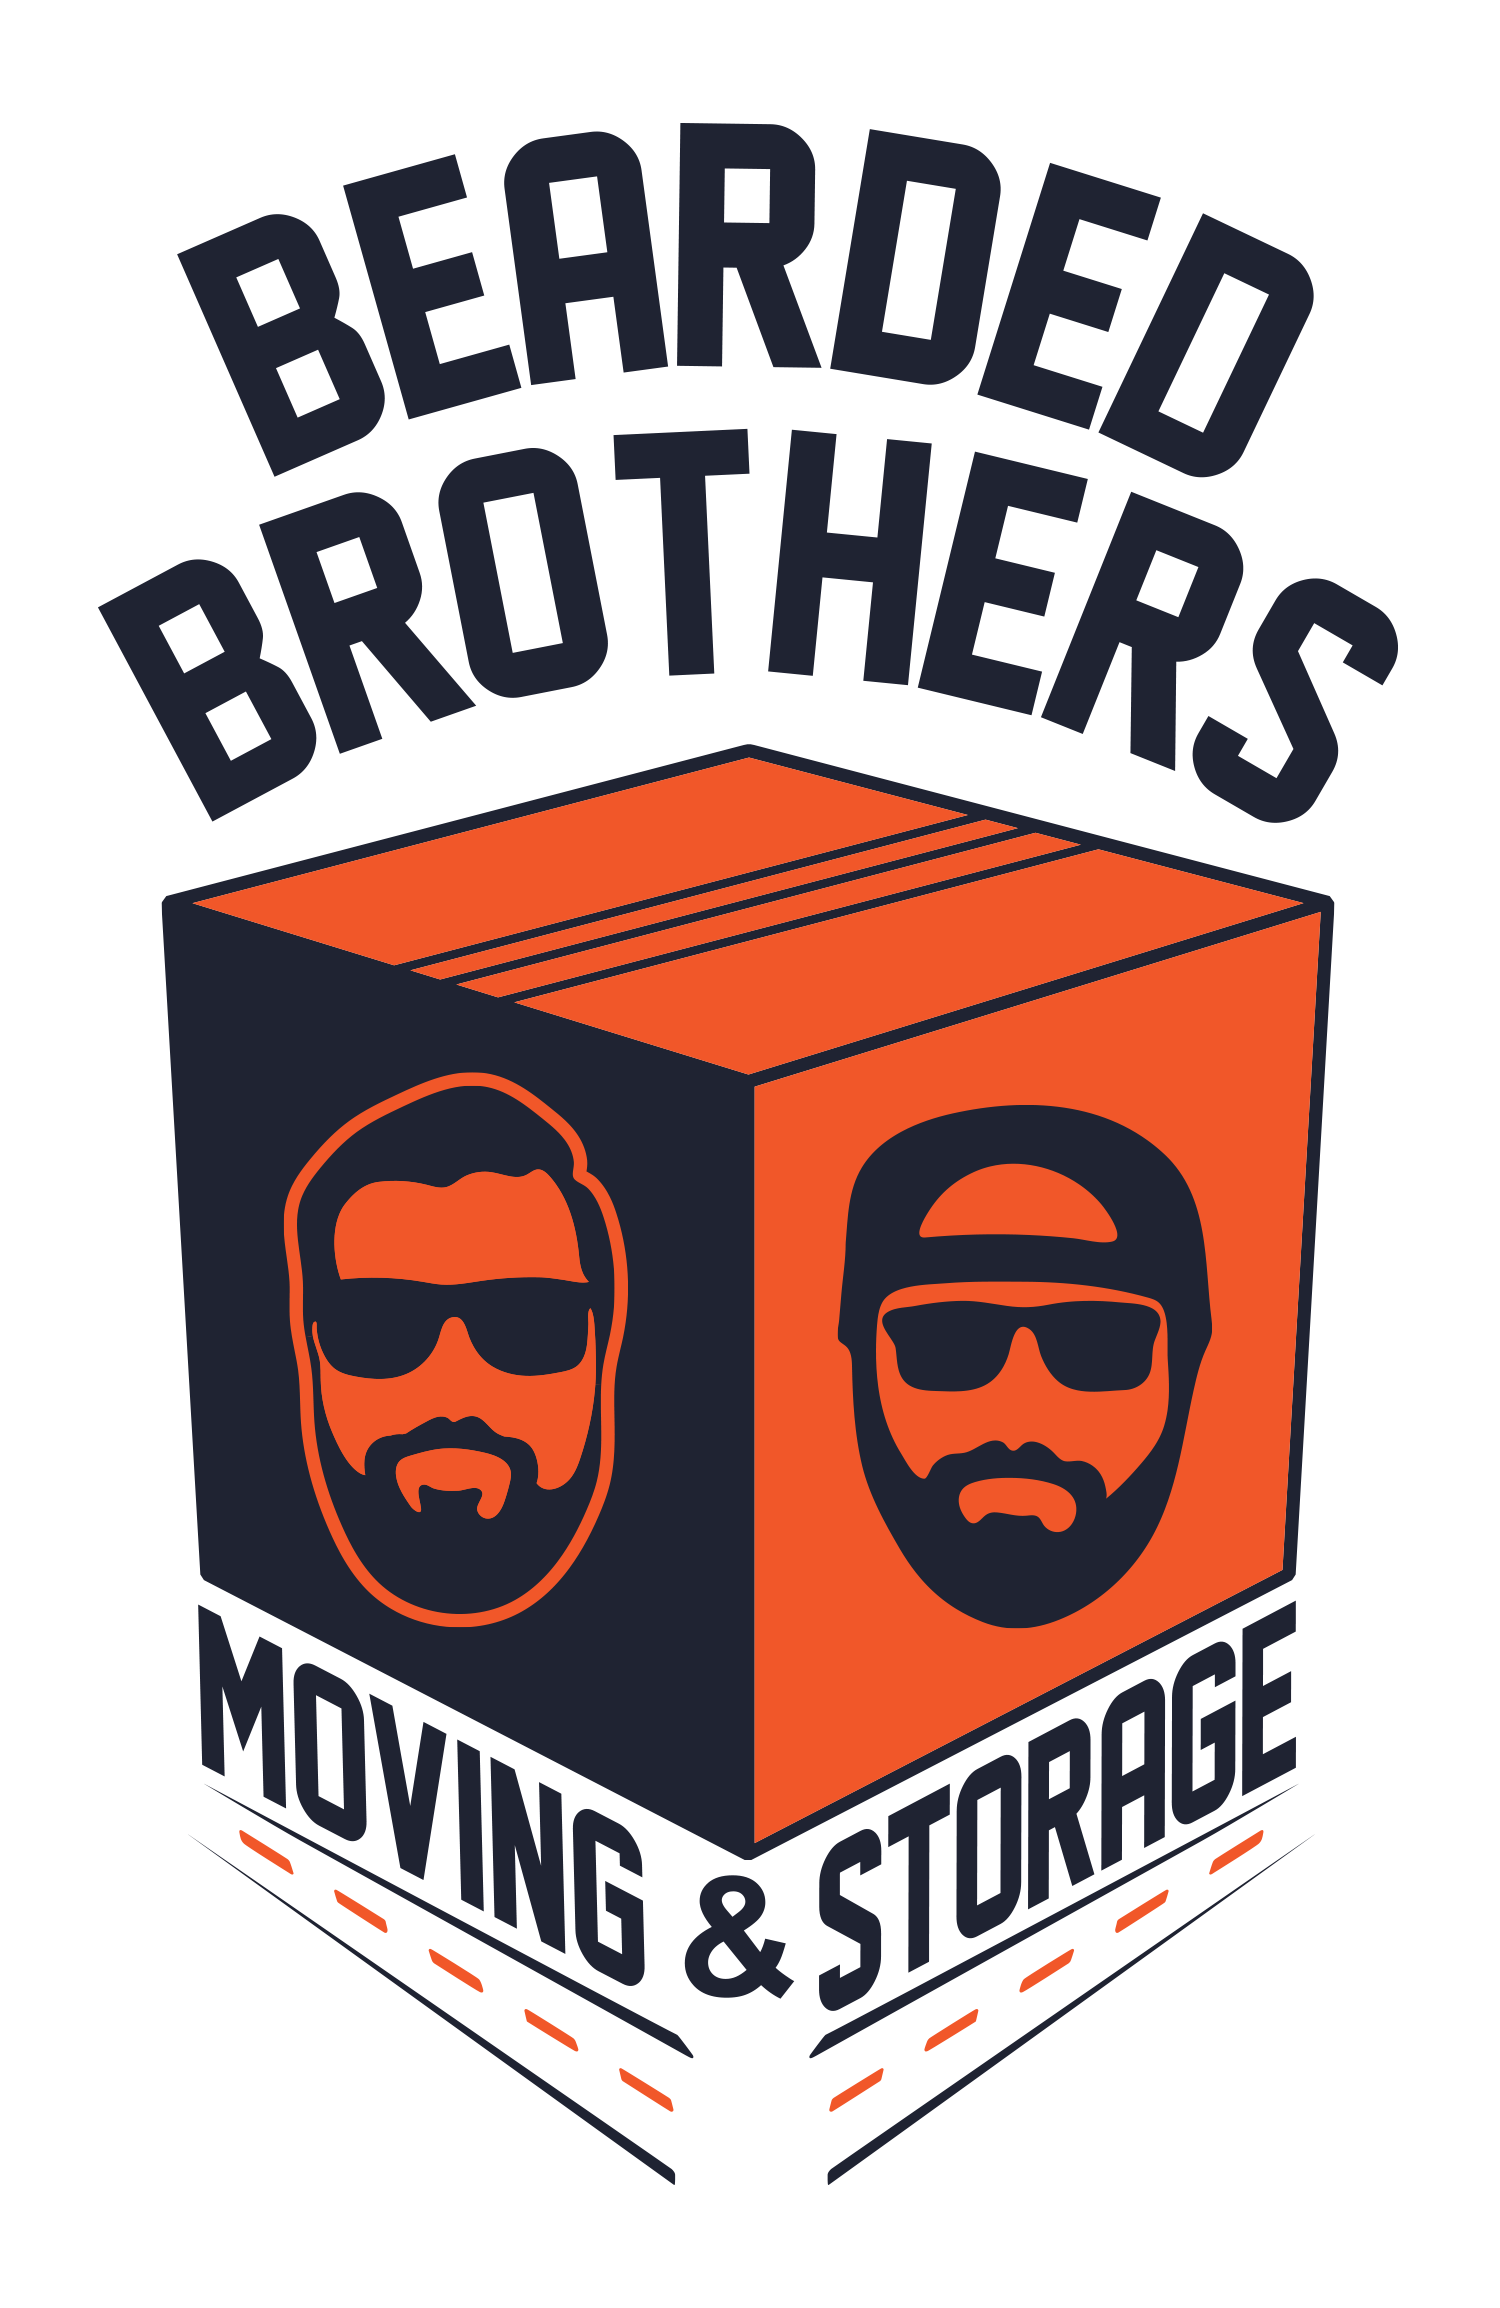 Bearded Brothers Packing and Moving, LLC Logo